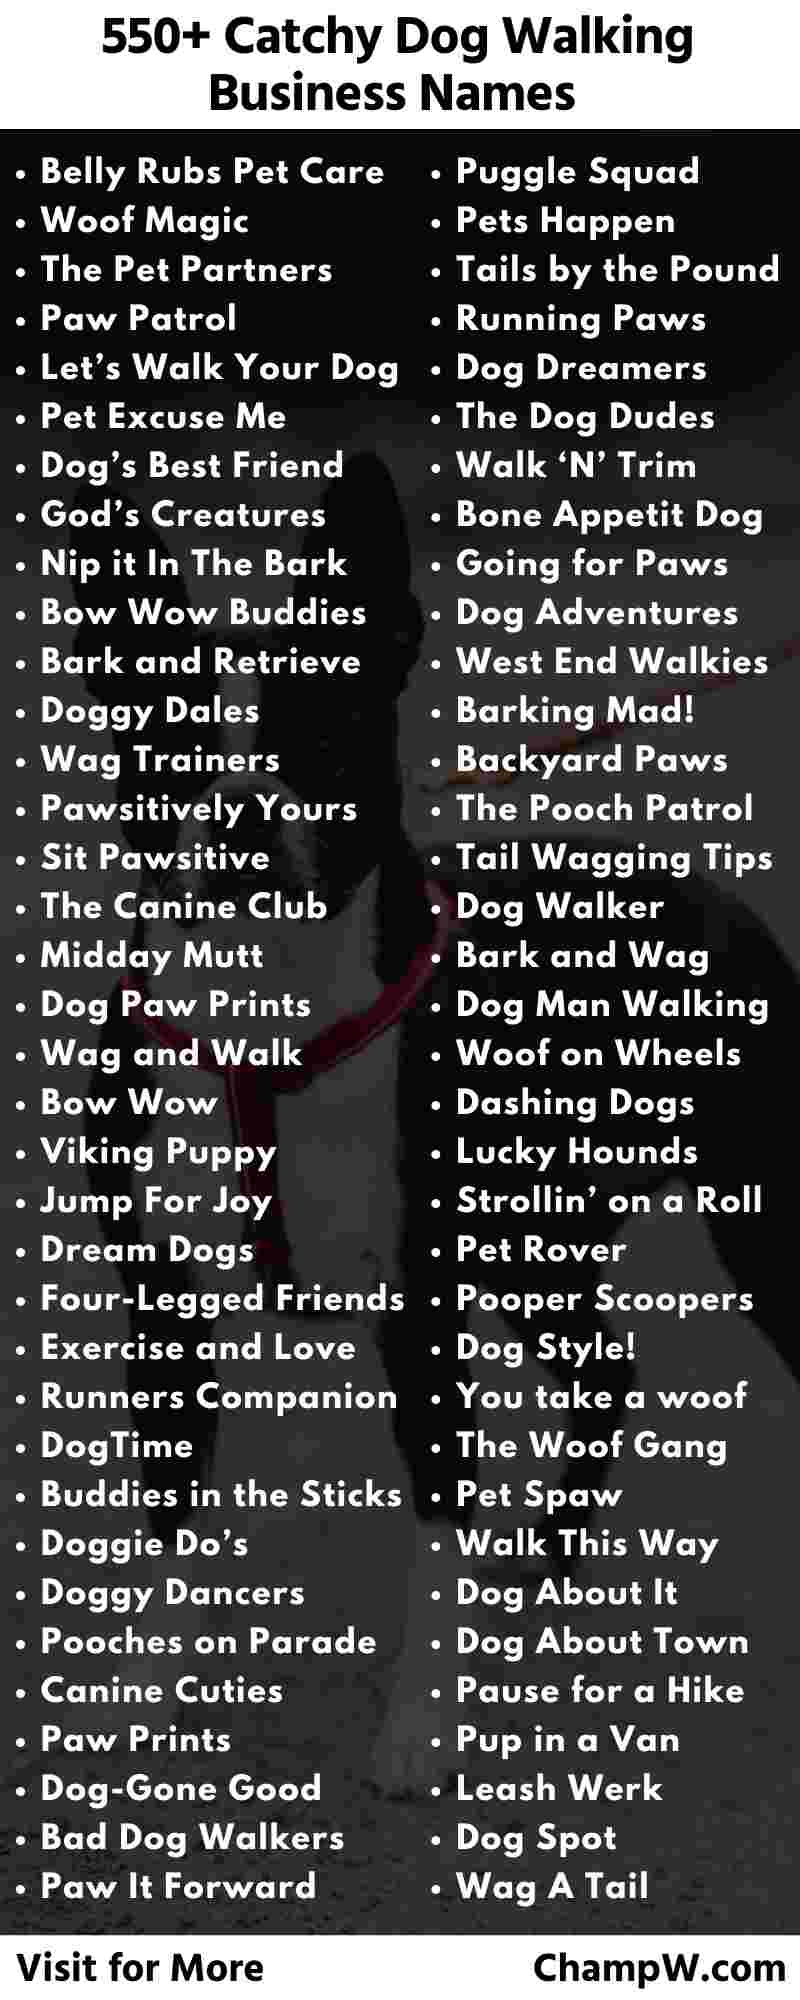 Dog Walking Business Names infographic